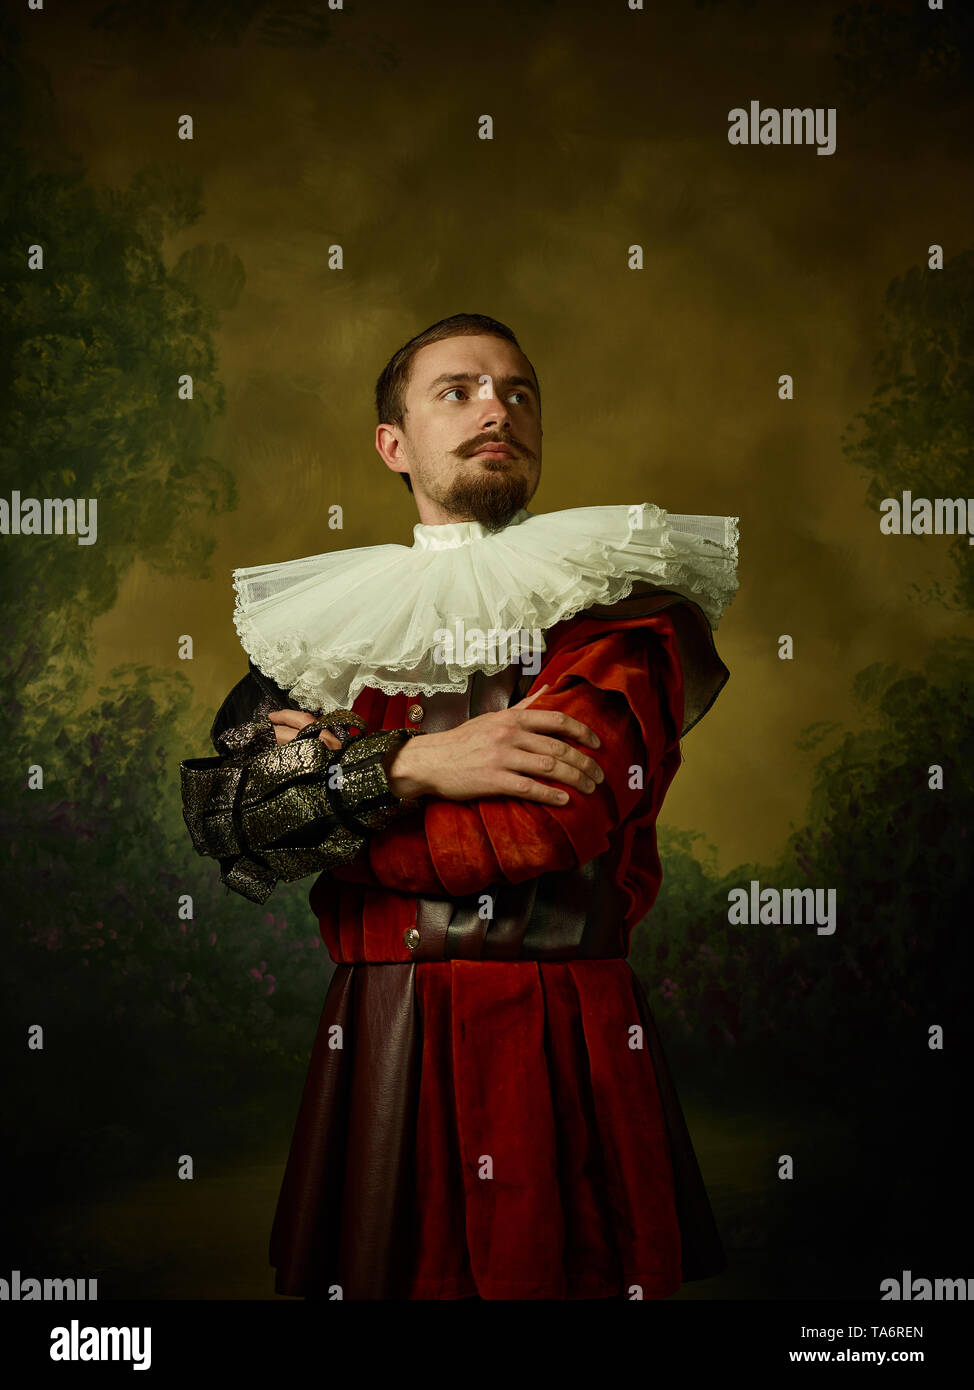 Young man as a medieval knight on dark studio background. Portrait in low key of male model in retro costume. Looks serious. Human emotions, compariso Stock Photo